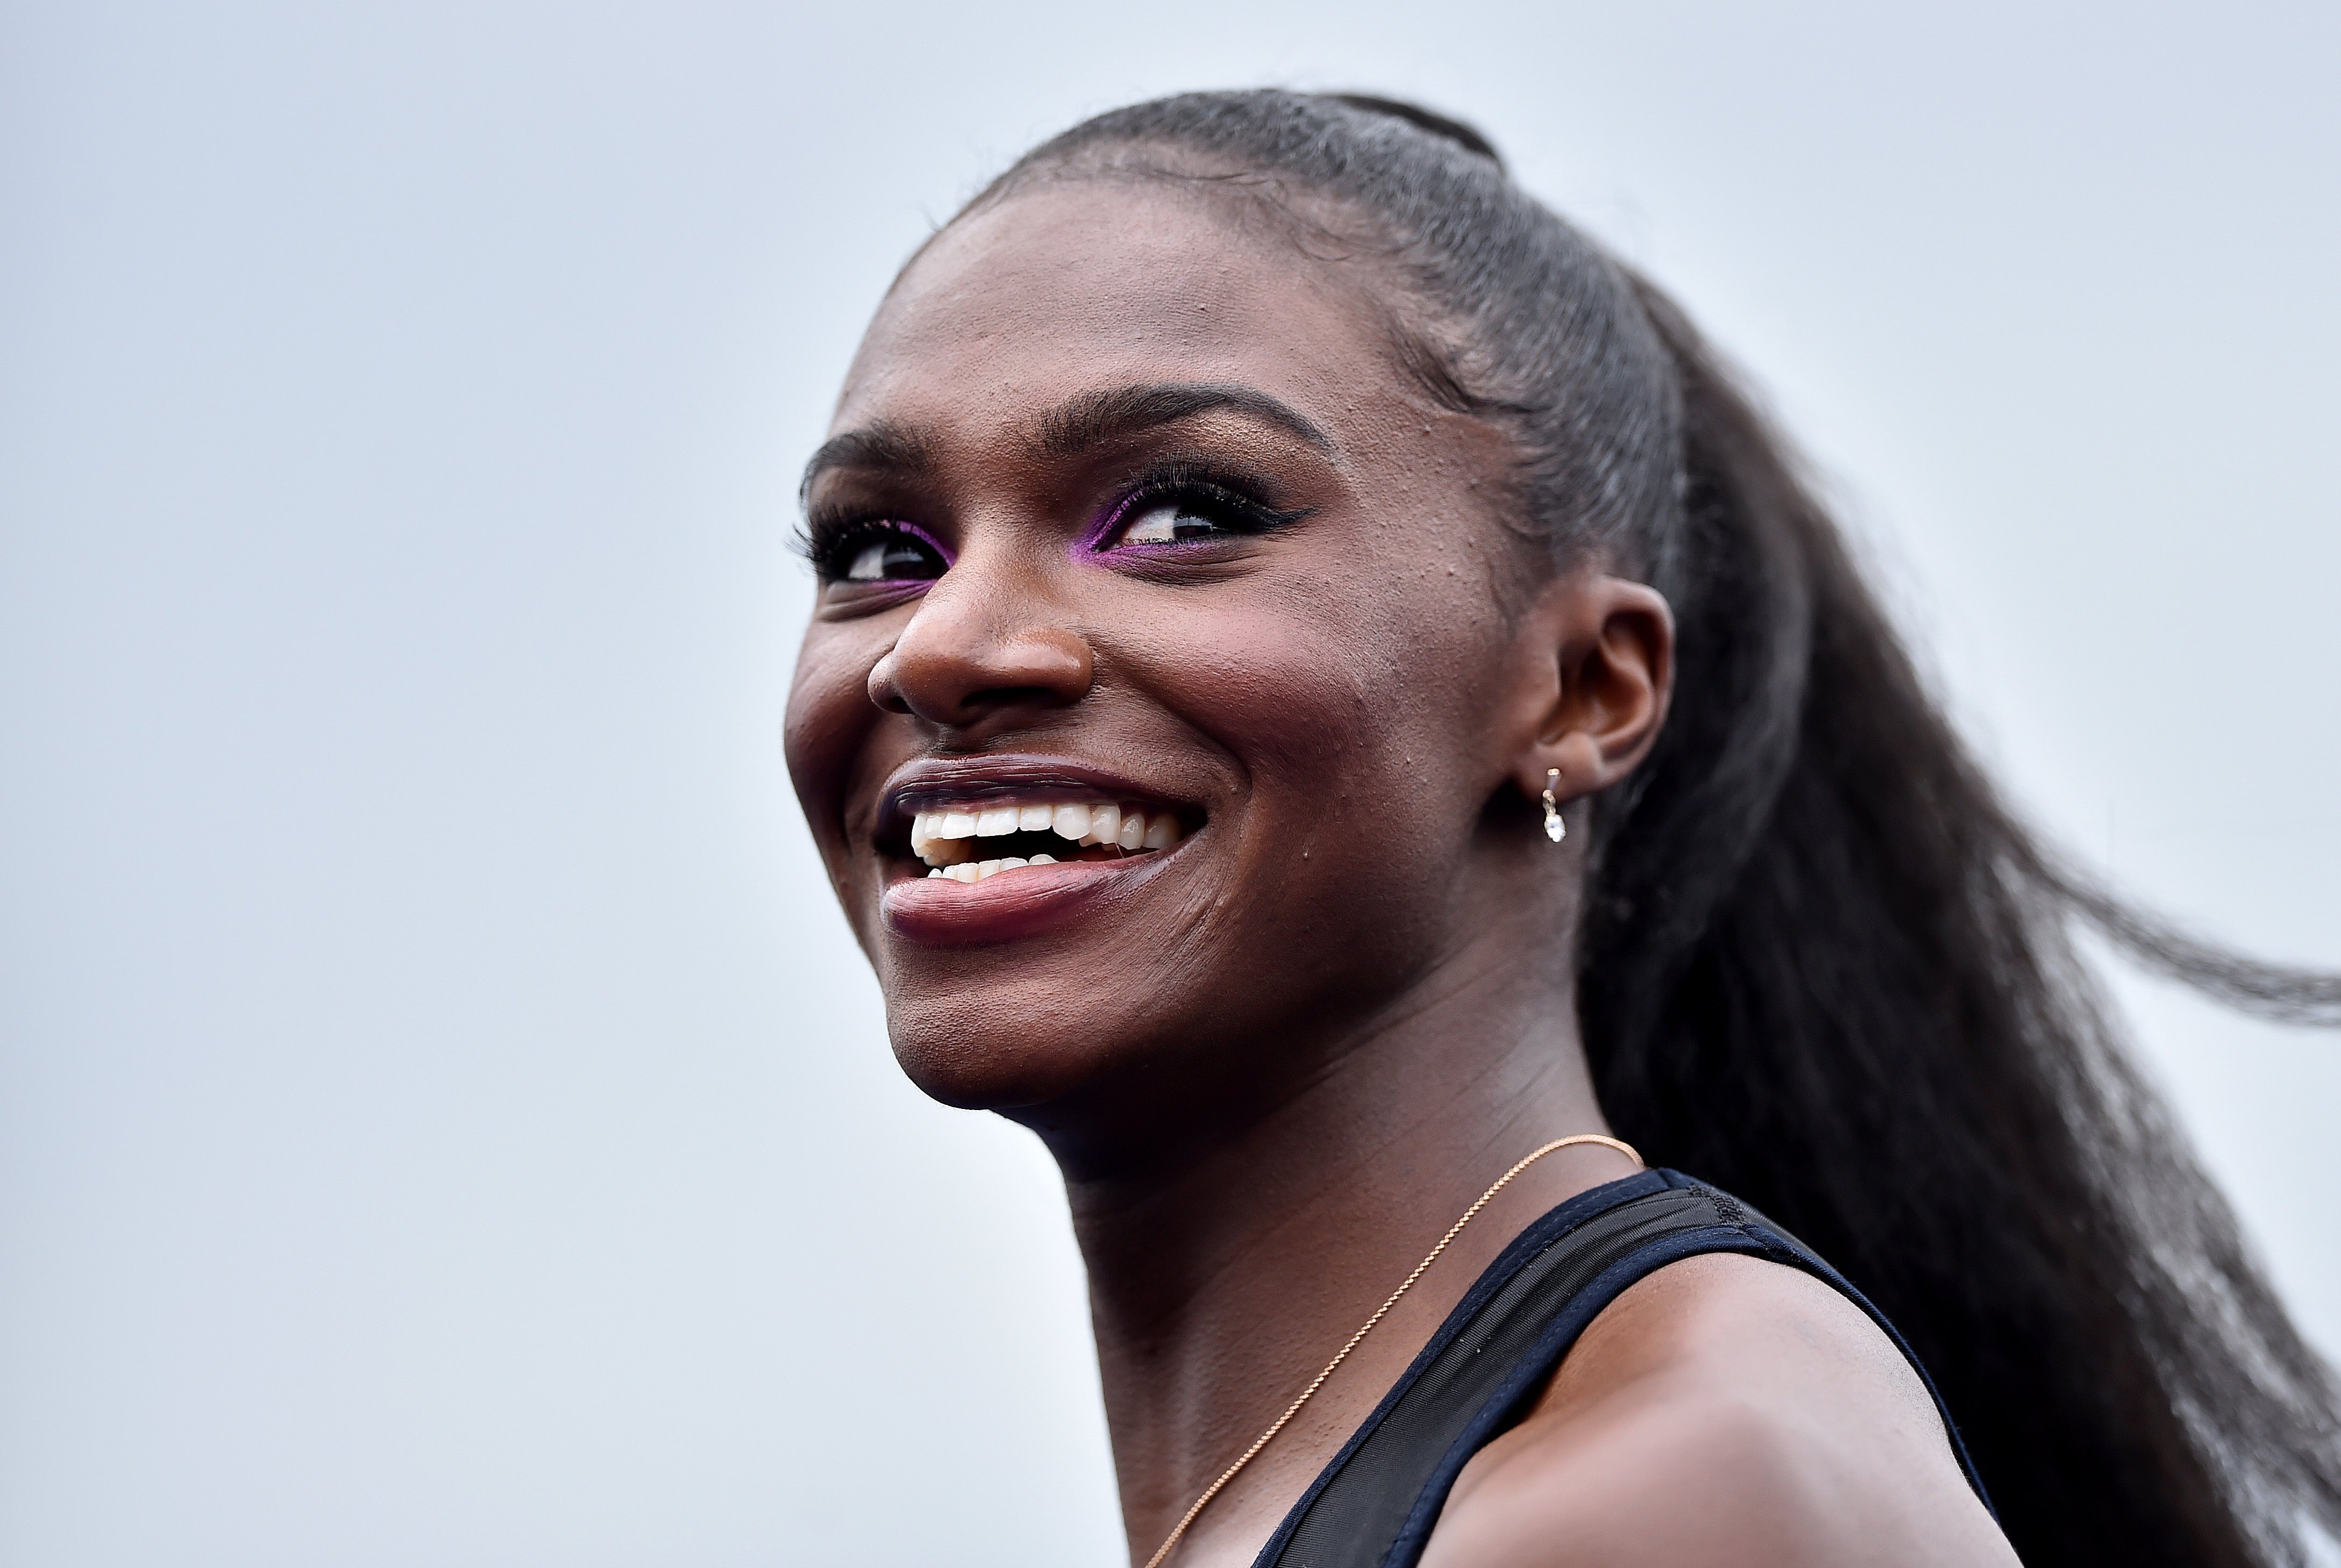 Dina Asher-Smith will compete in the 100m and 200m in Tokyo